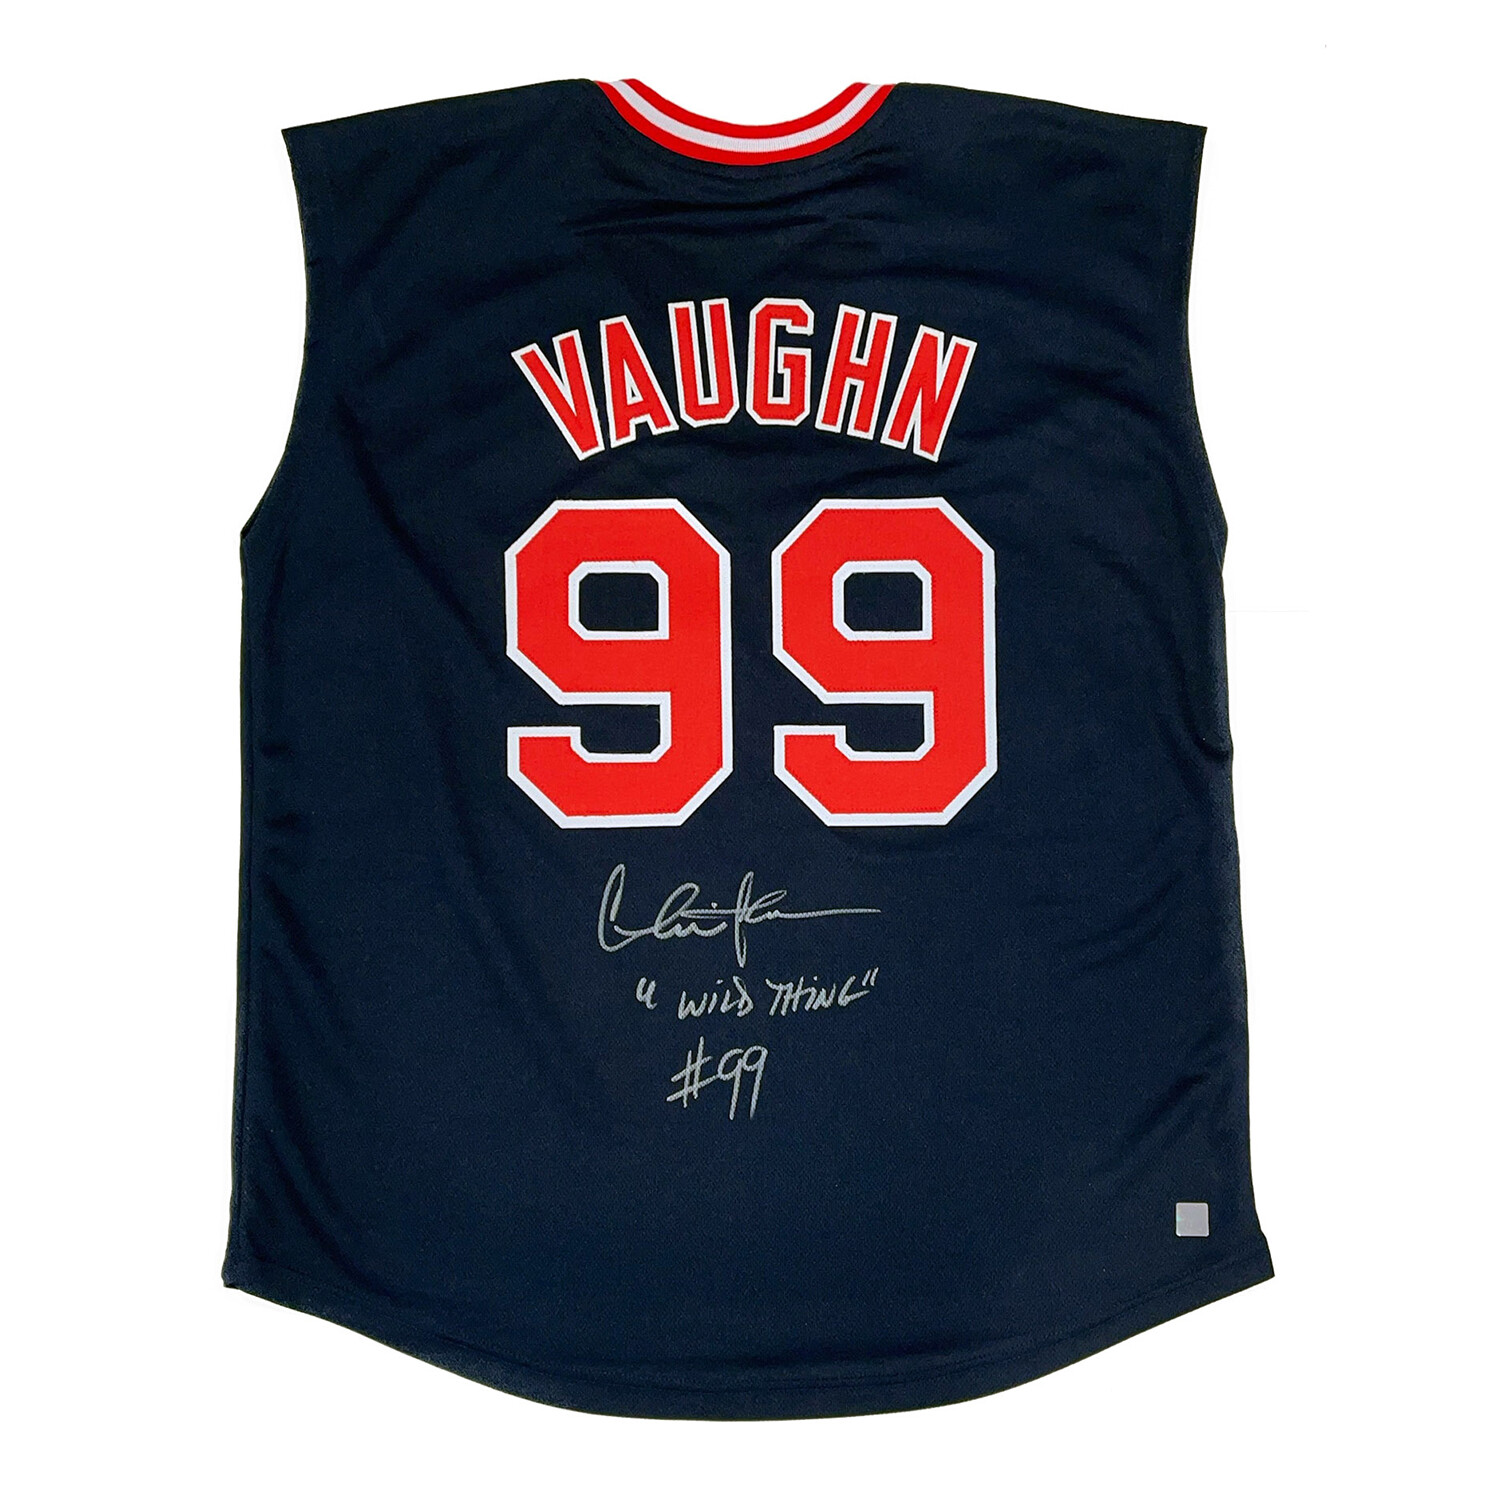 Charlie Sheen Autographed Cleveland Indians Sleeveless Vaughn Jersey  Wild Thing #99 Inscription - Autographed Collectibles - Touch of Modern